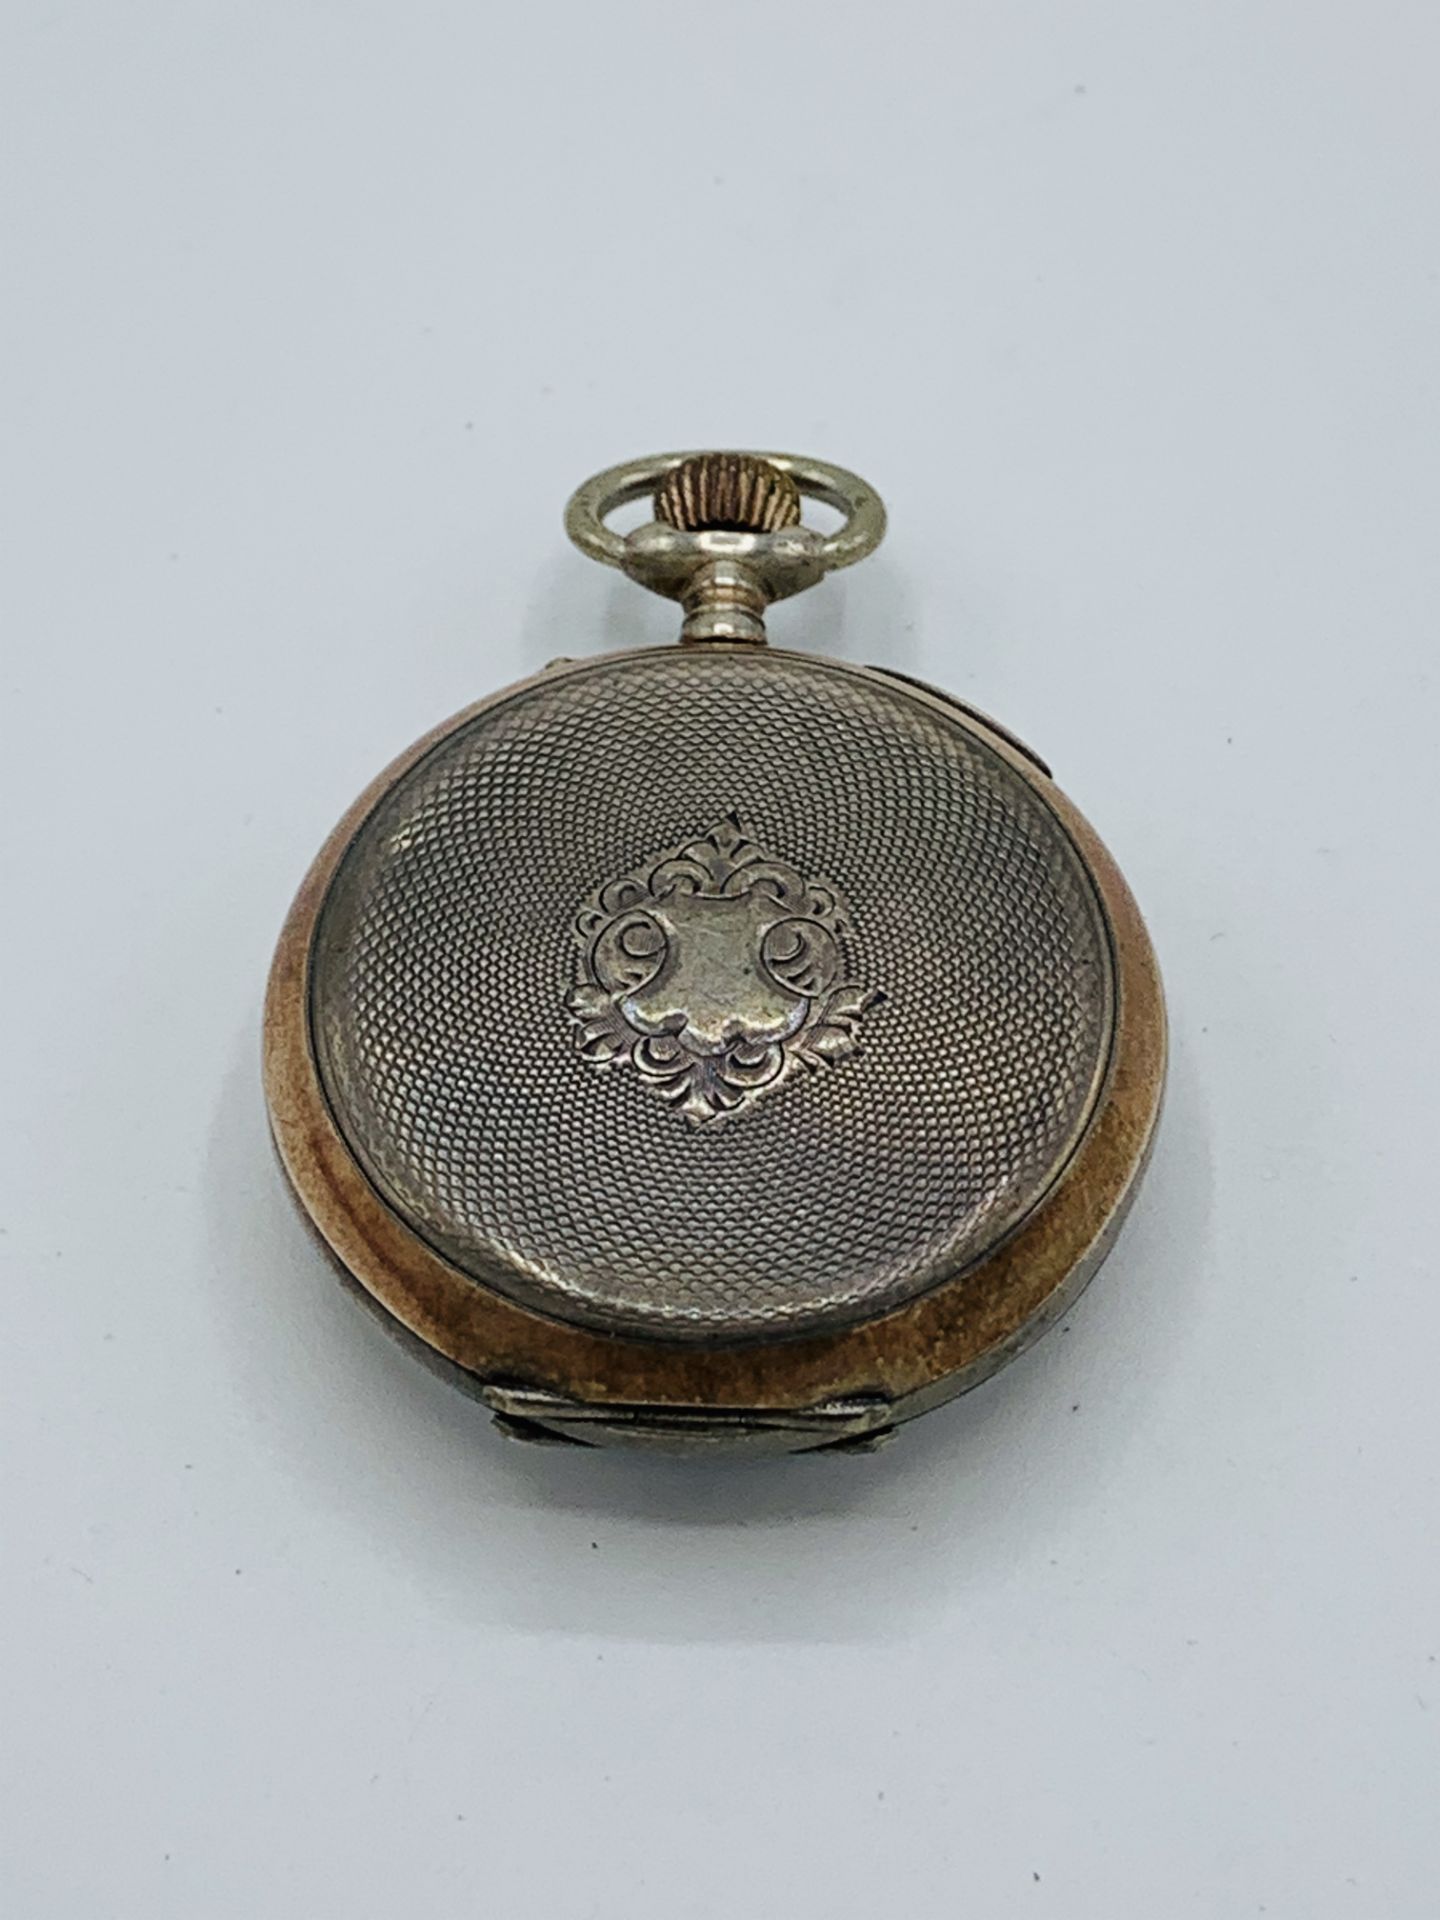 800 silver and gold plate case manual wind lady's pocket watch, in going order - Image 3 of 6